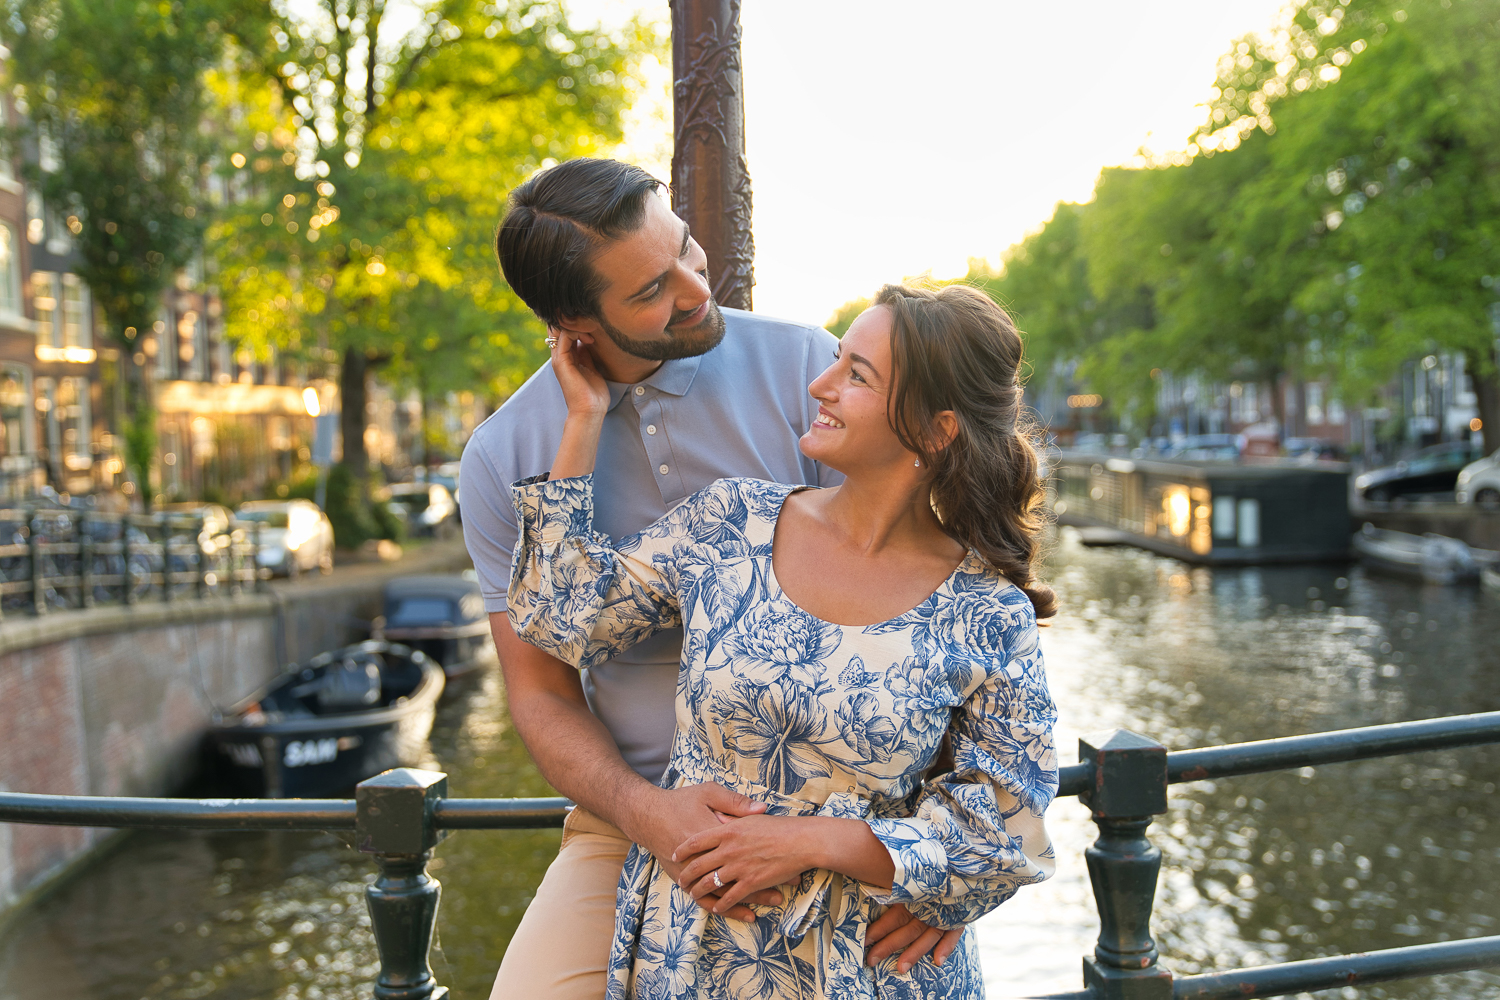 A couple is romantically hugging and smiling at each other in Amsterdam's canals while doing an engagement shoot.